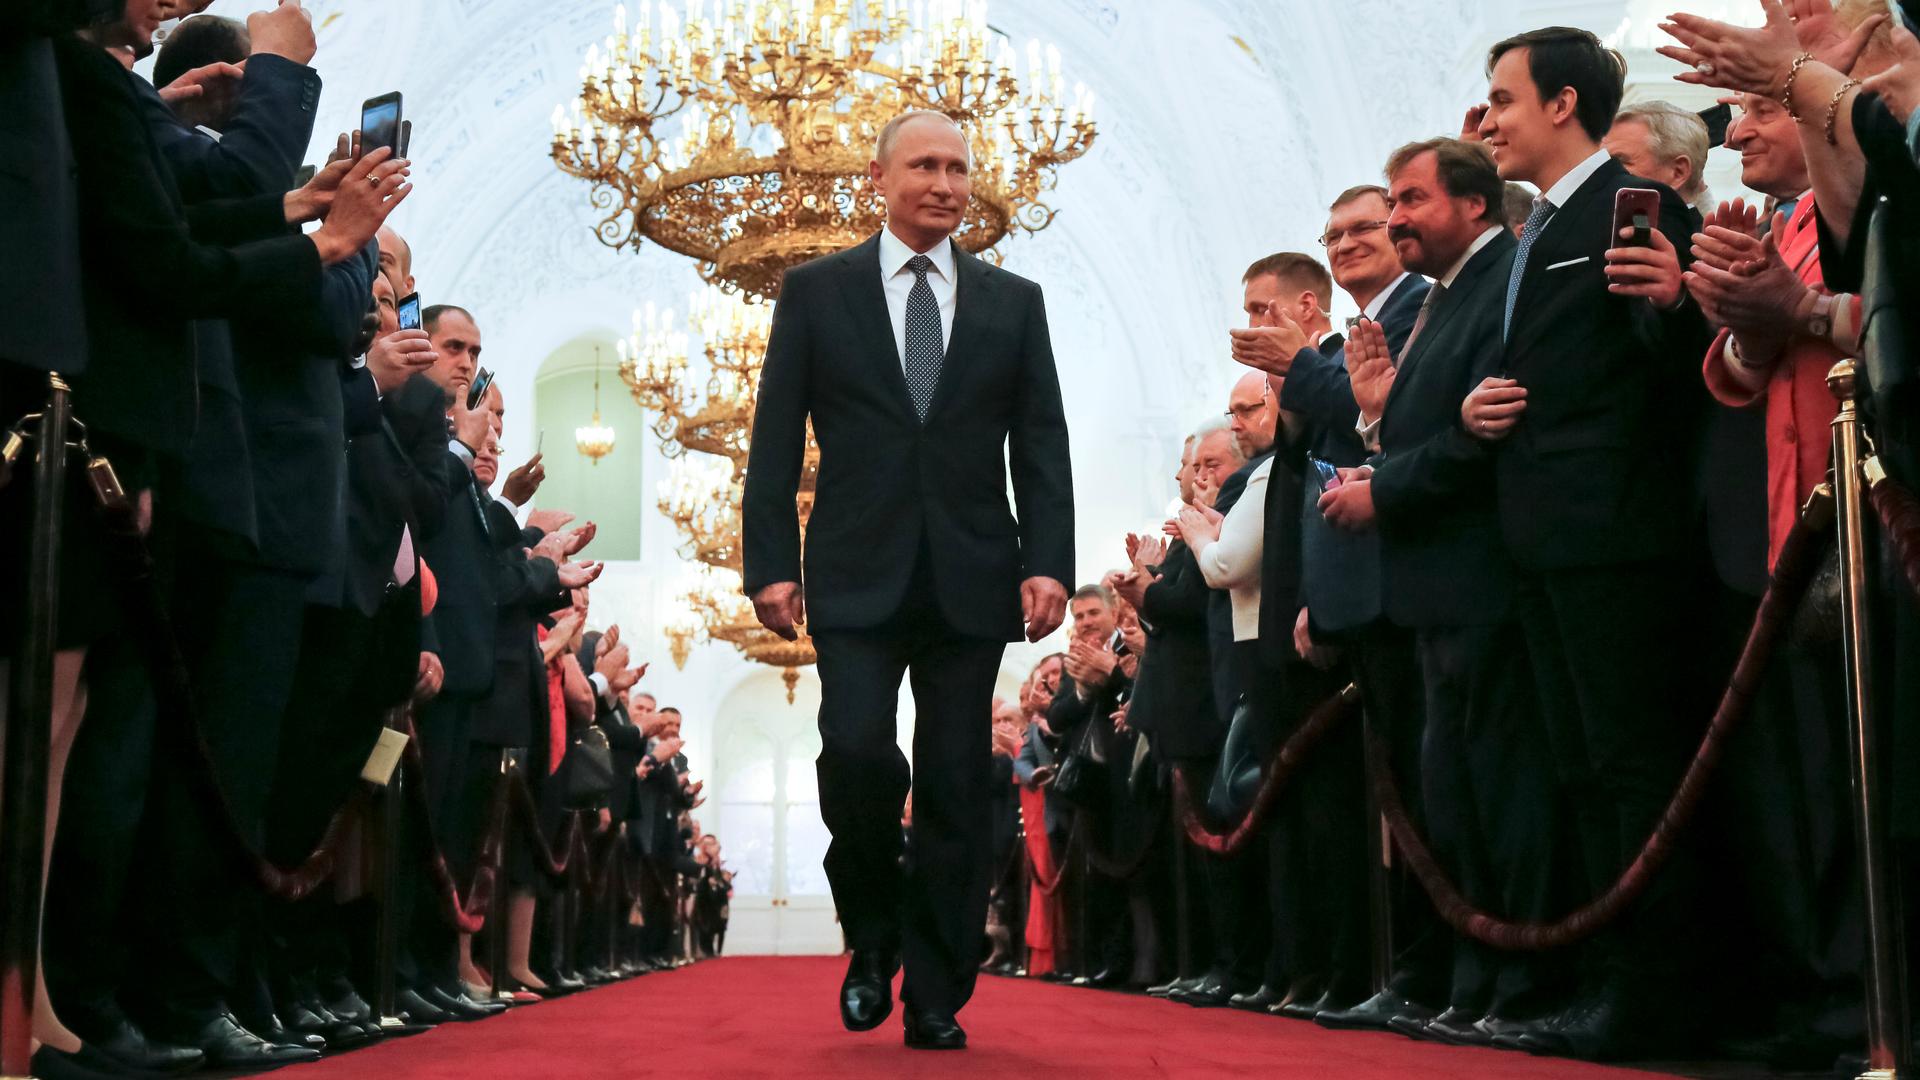 Russian President Vladimir Putin attends his fourth inauguration ceremony at the Kremlin in Moscow, Russia, May 7, 2018.